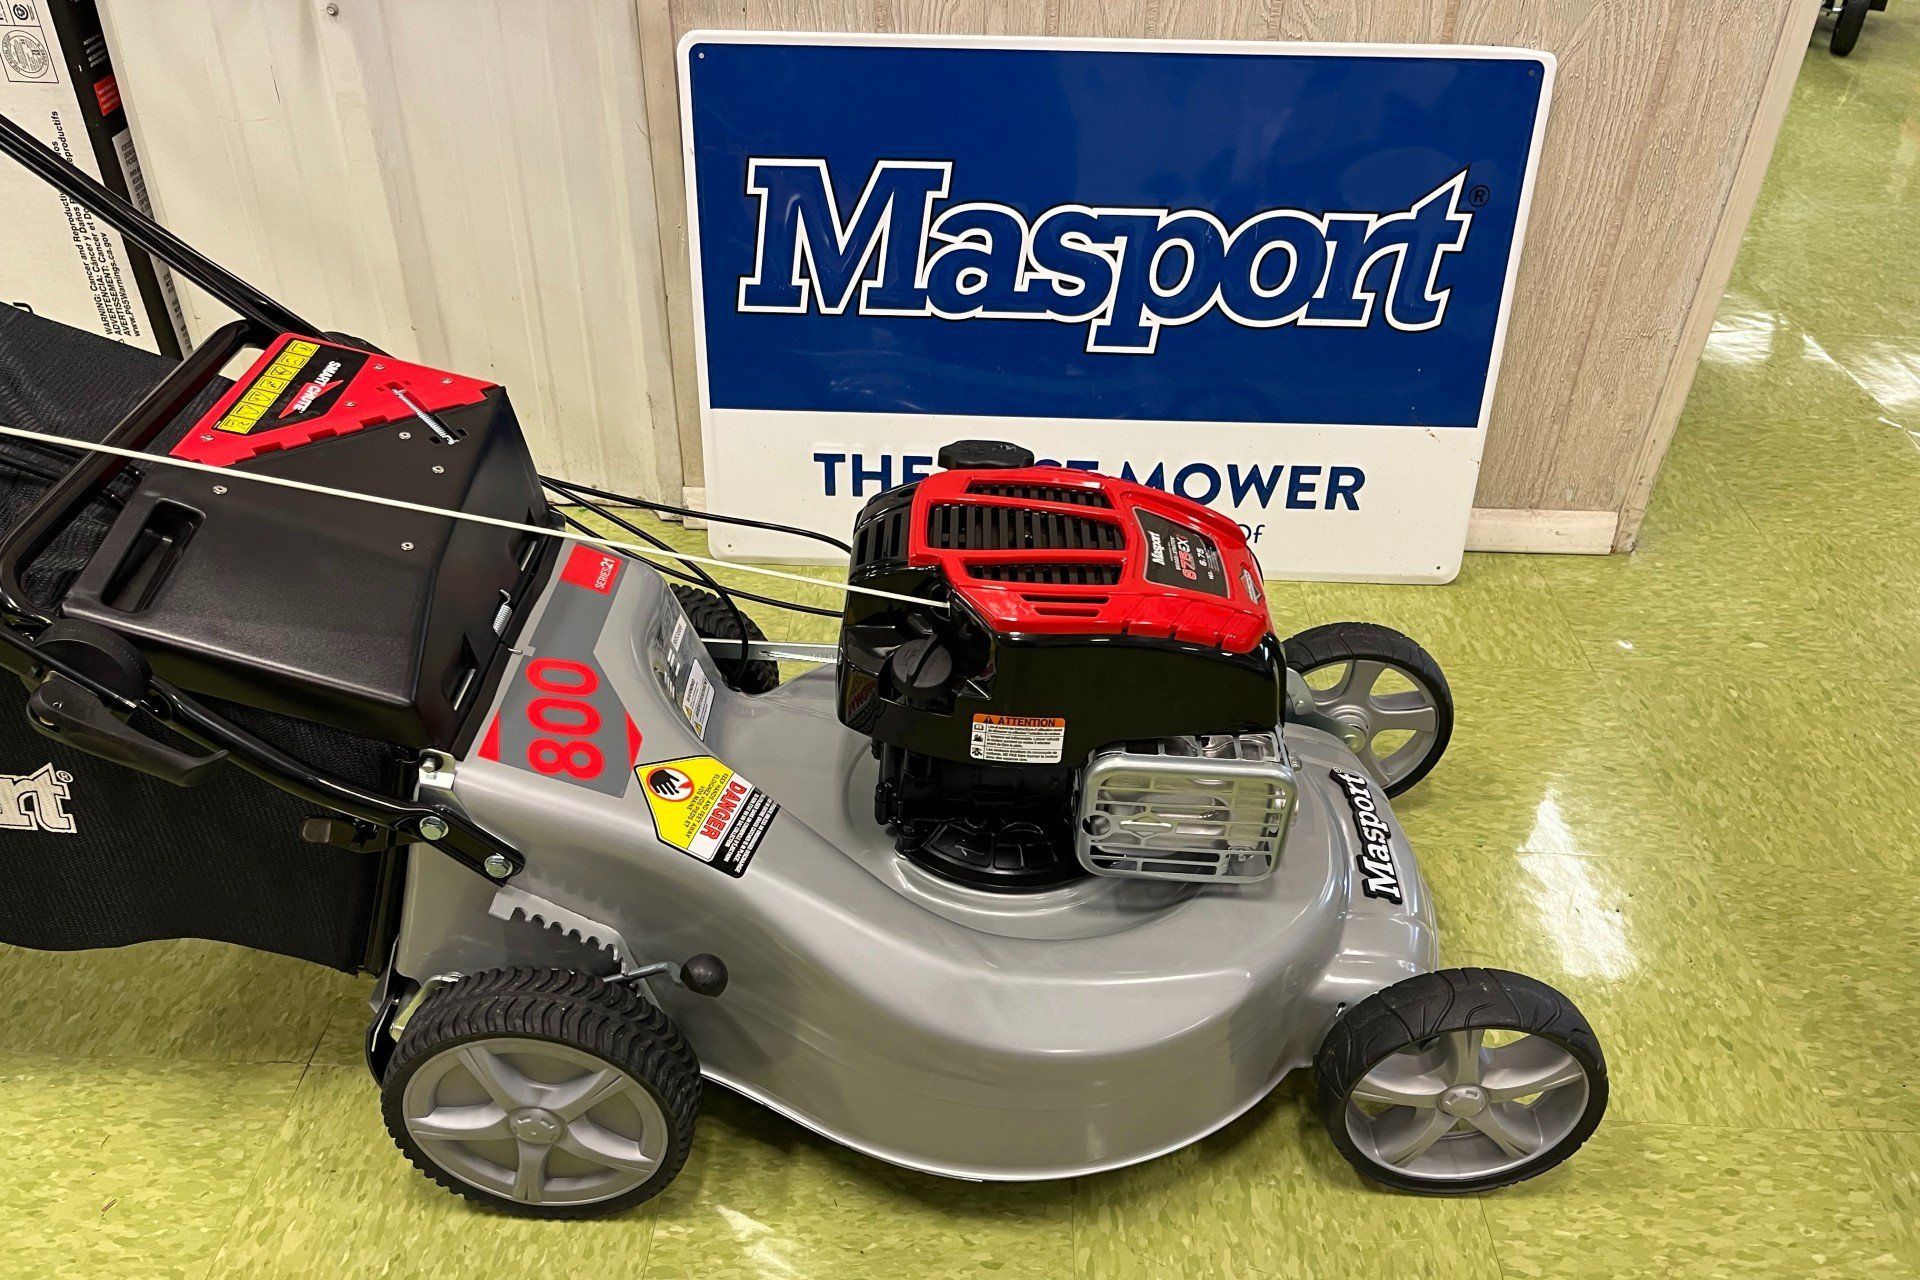 A lawn mower is sitting in front of a Masport sign